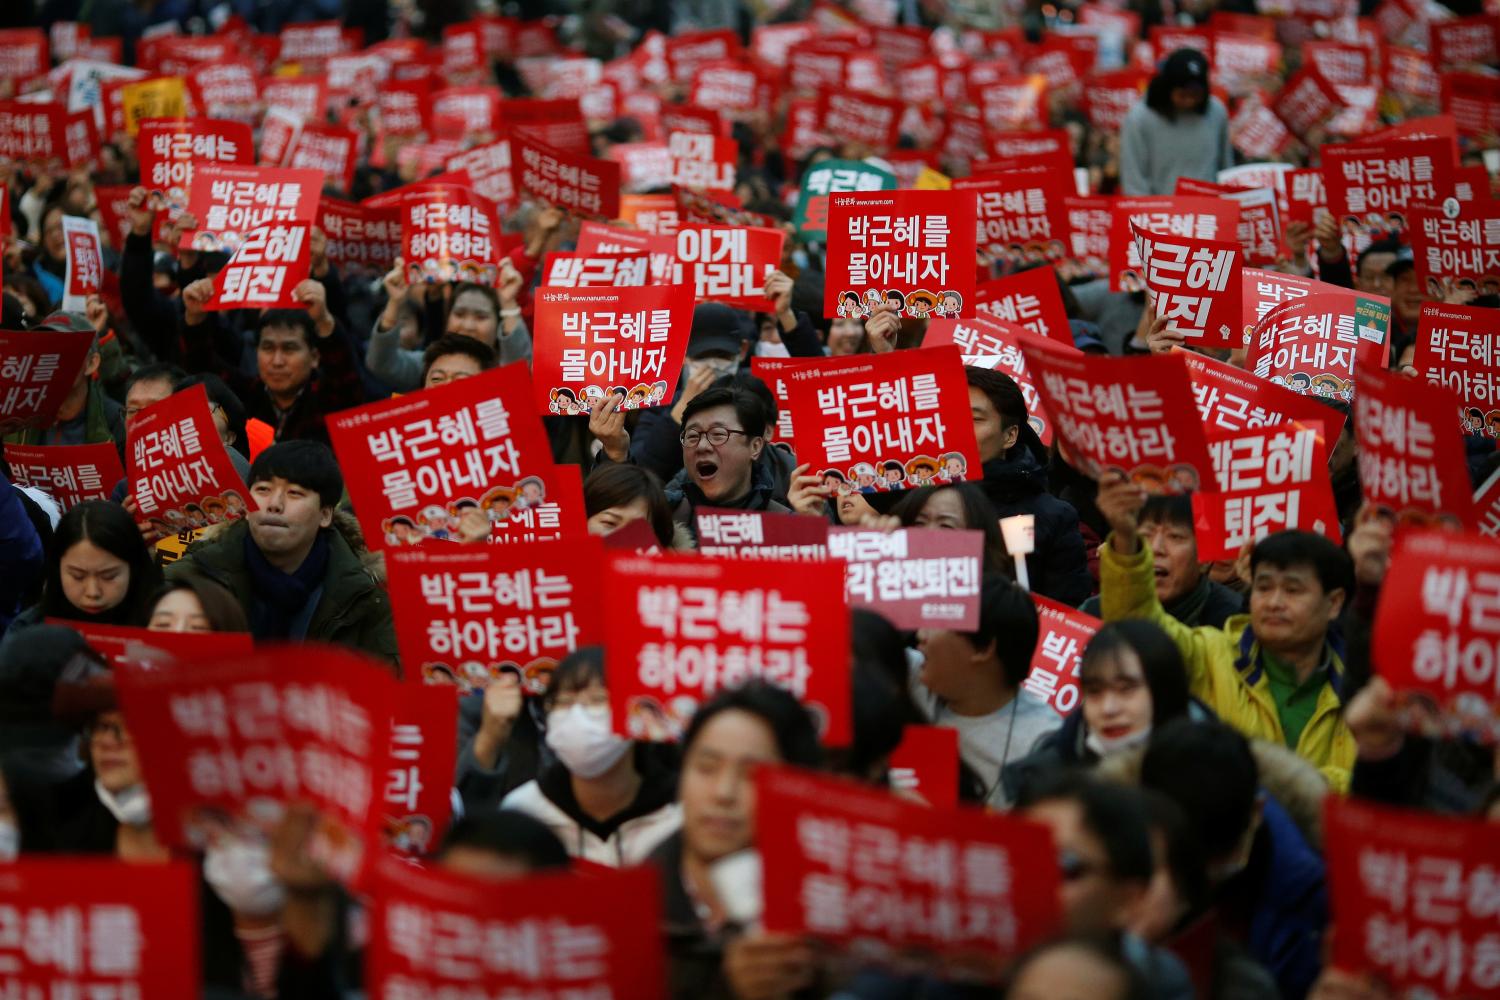 People chant slogans during a protest calling South Korean President Park Geun-hye to step down in Seoul, South Korea, November 19, 2016. The sign reads "Step down Park Geun-hye". REUTERS/Kim Hong-Ji - RTSSCDE